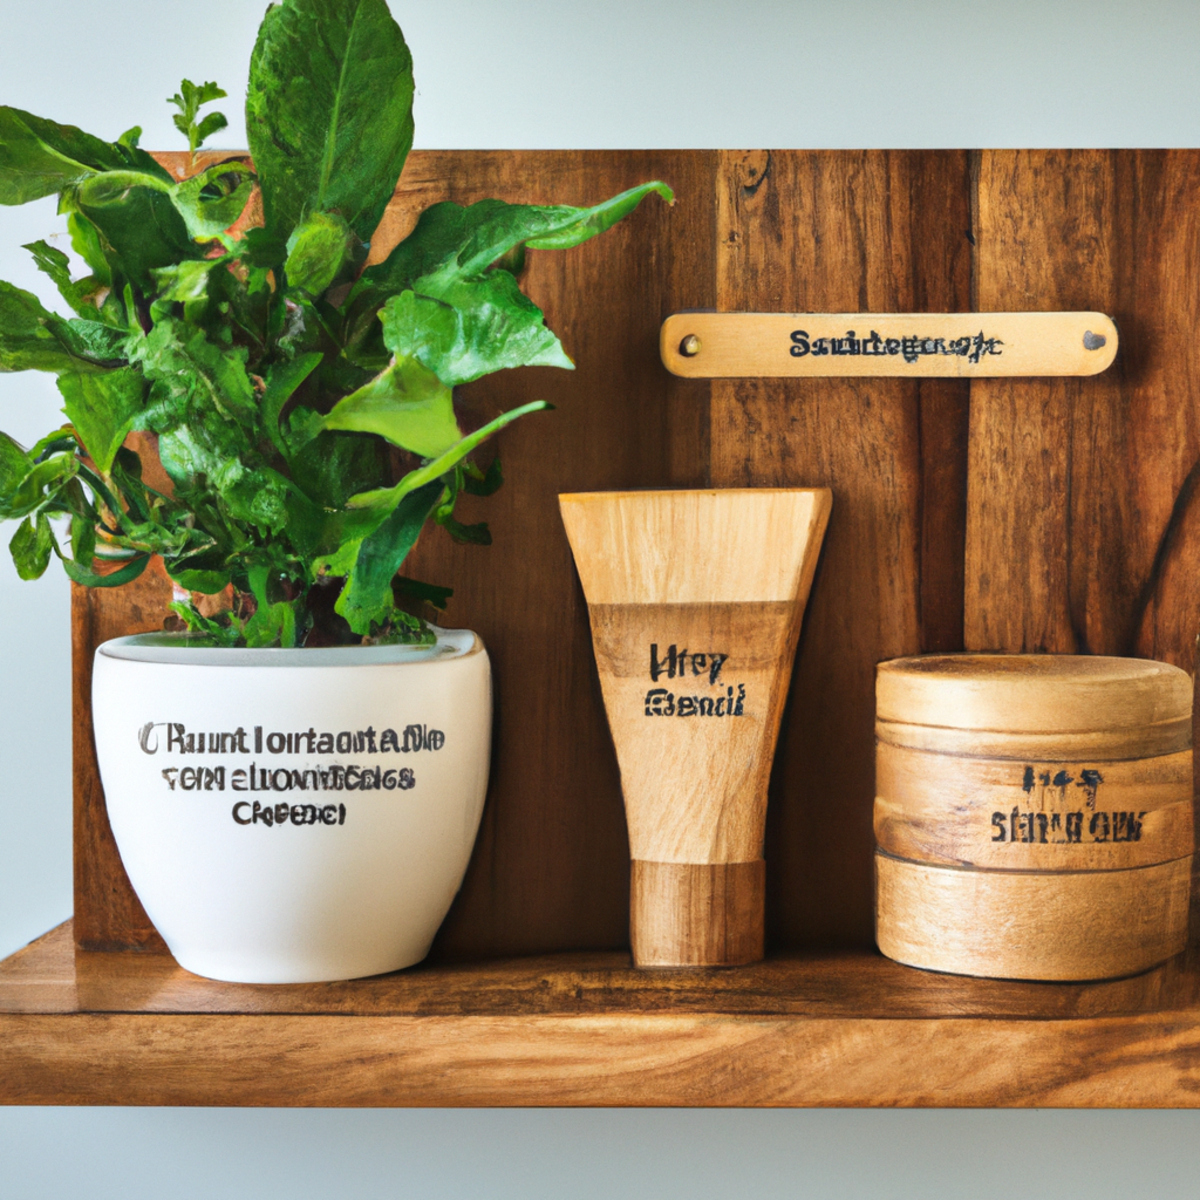 Curly haircare products on wooden shelf with plant and quote.